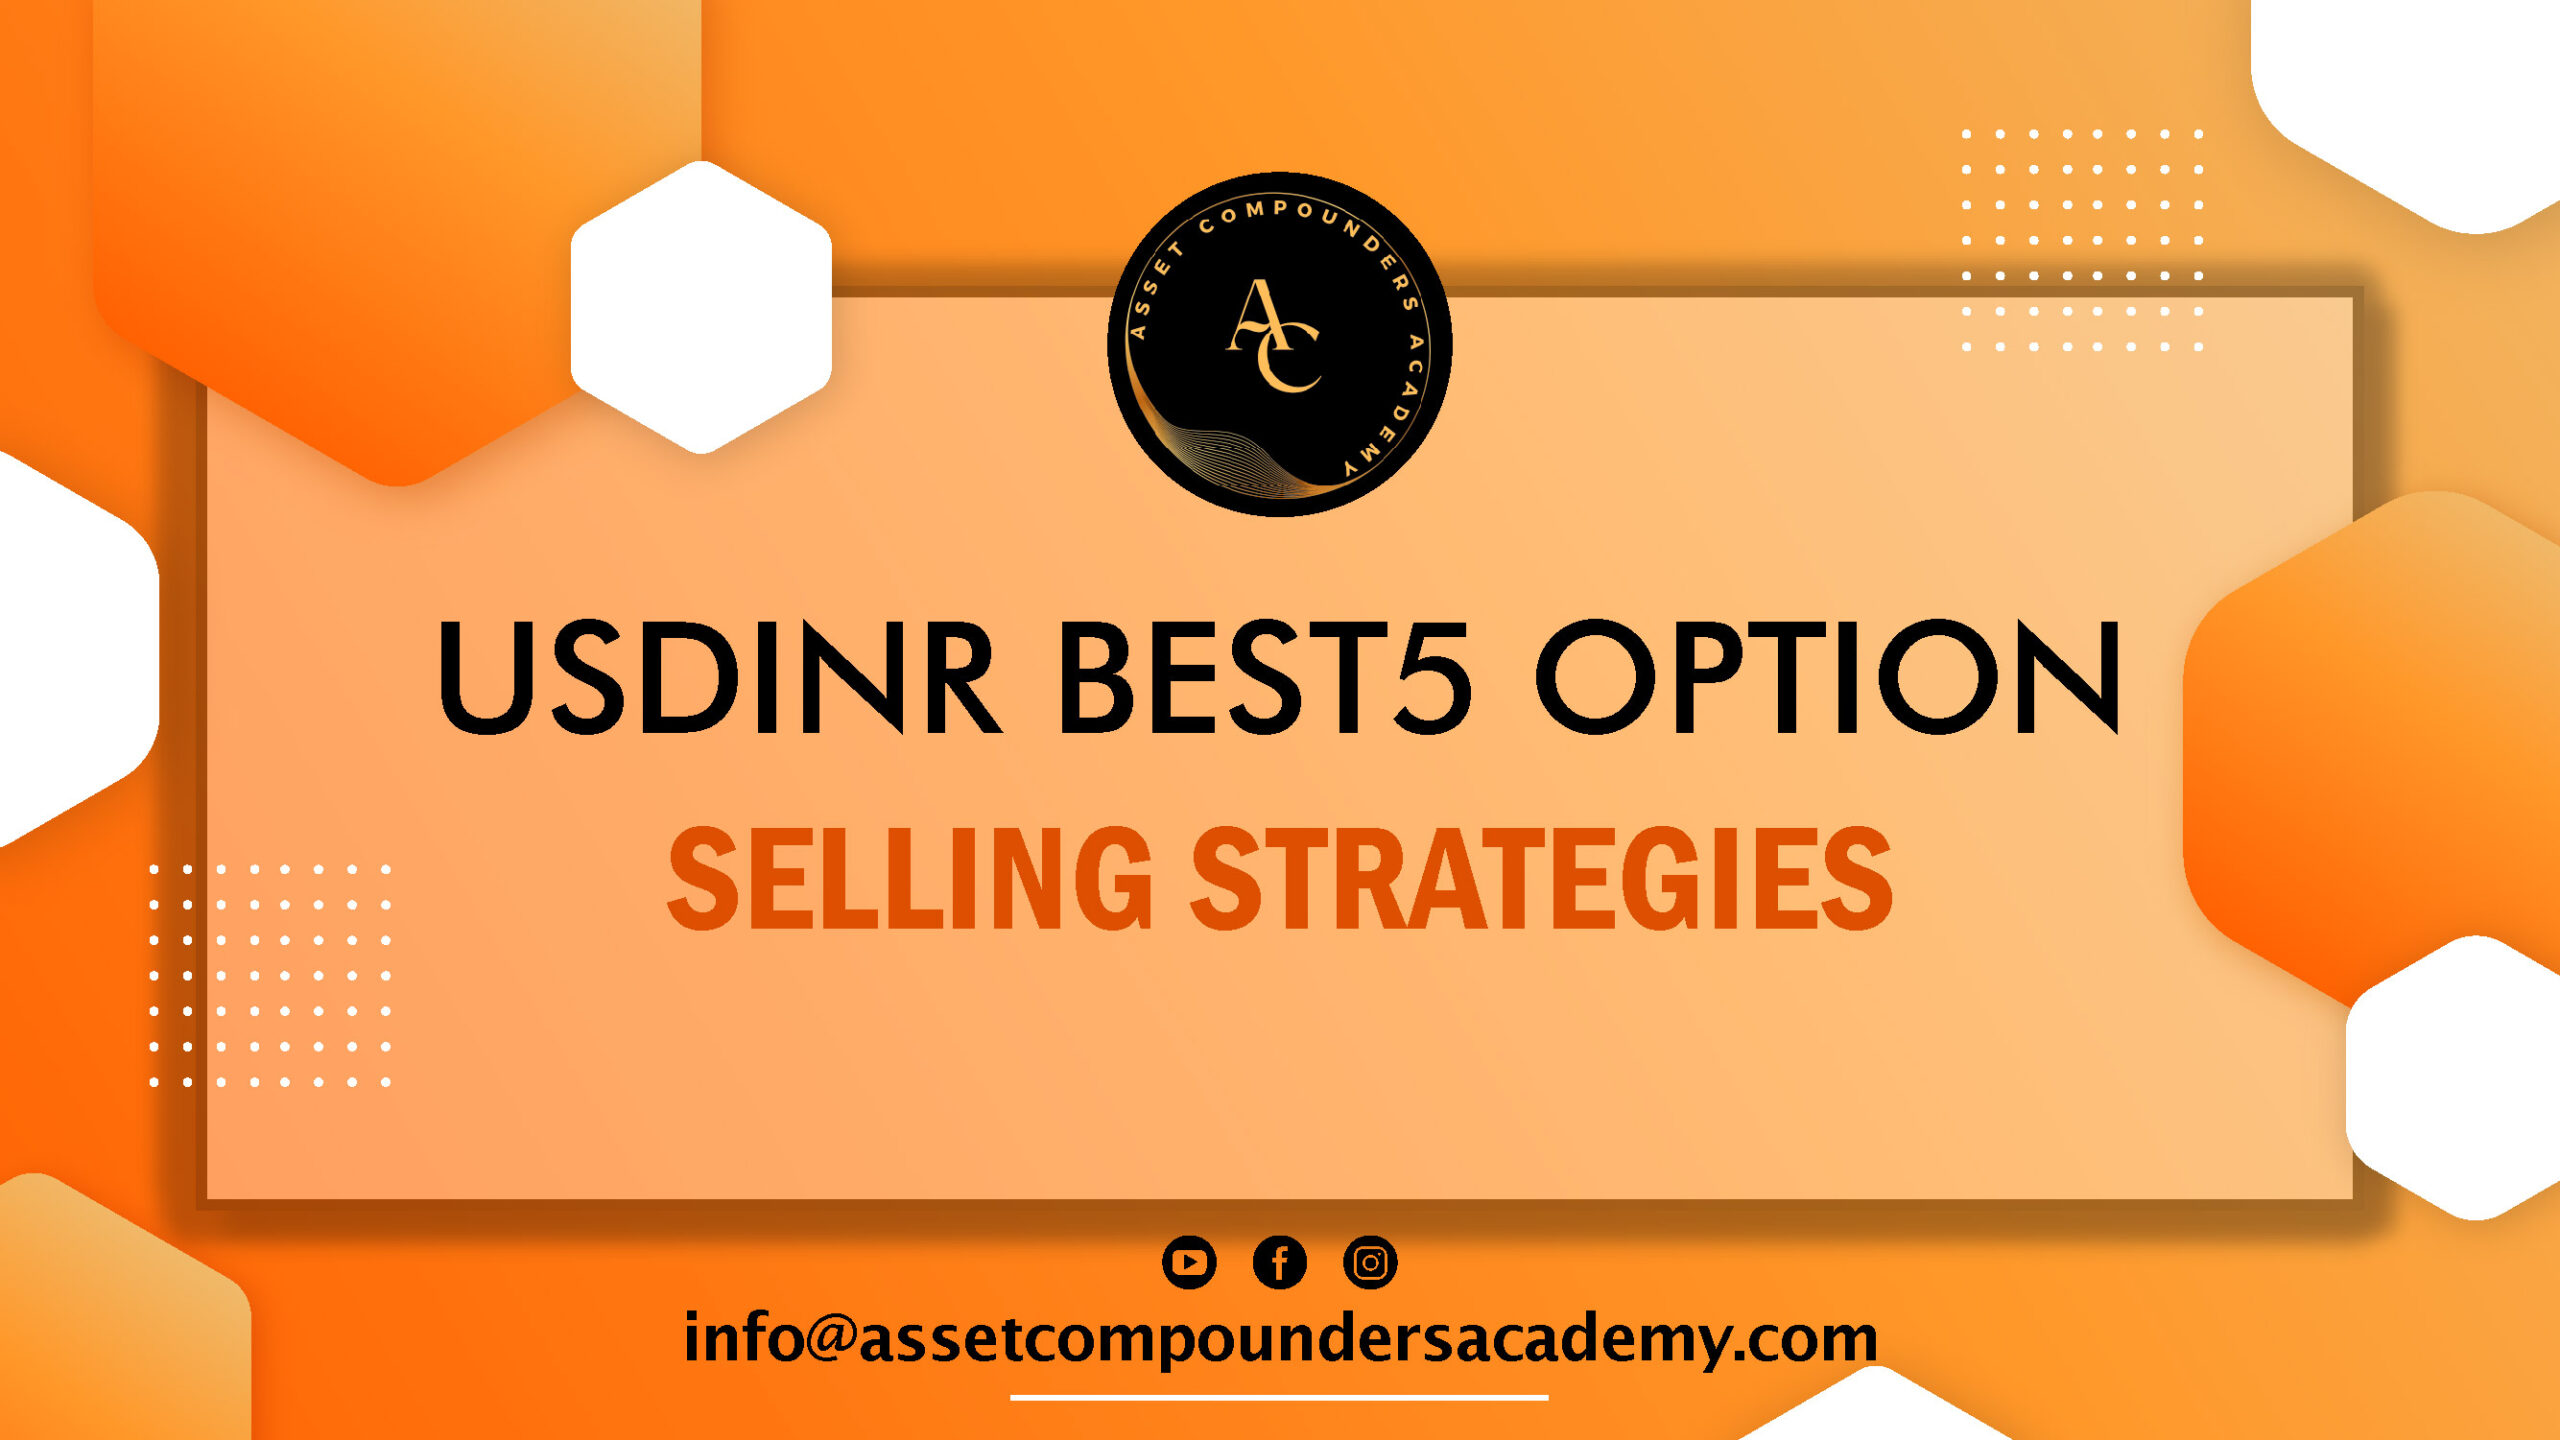 USDNR BEST 5 OPTION Selling Strategy